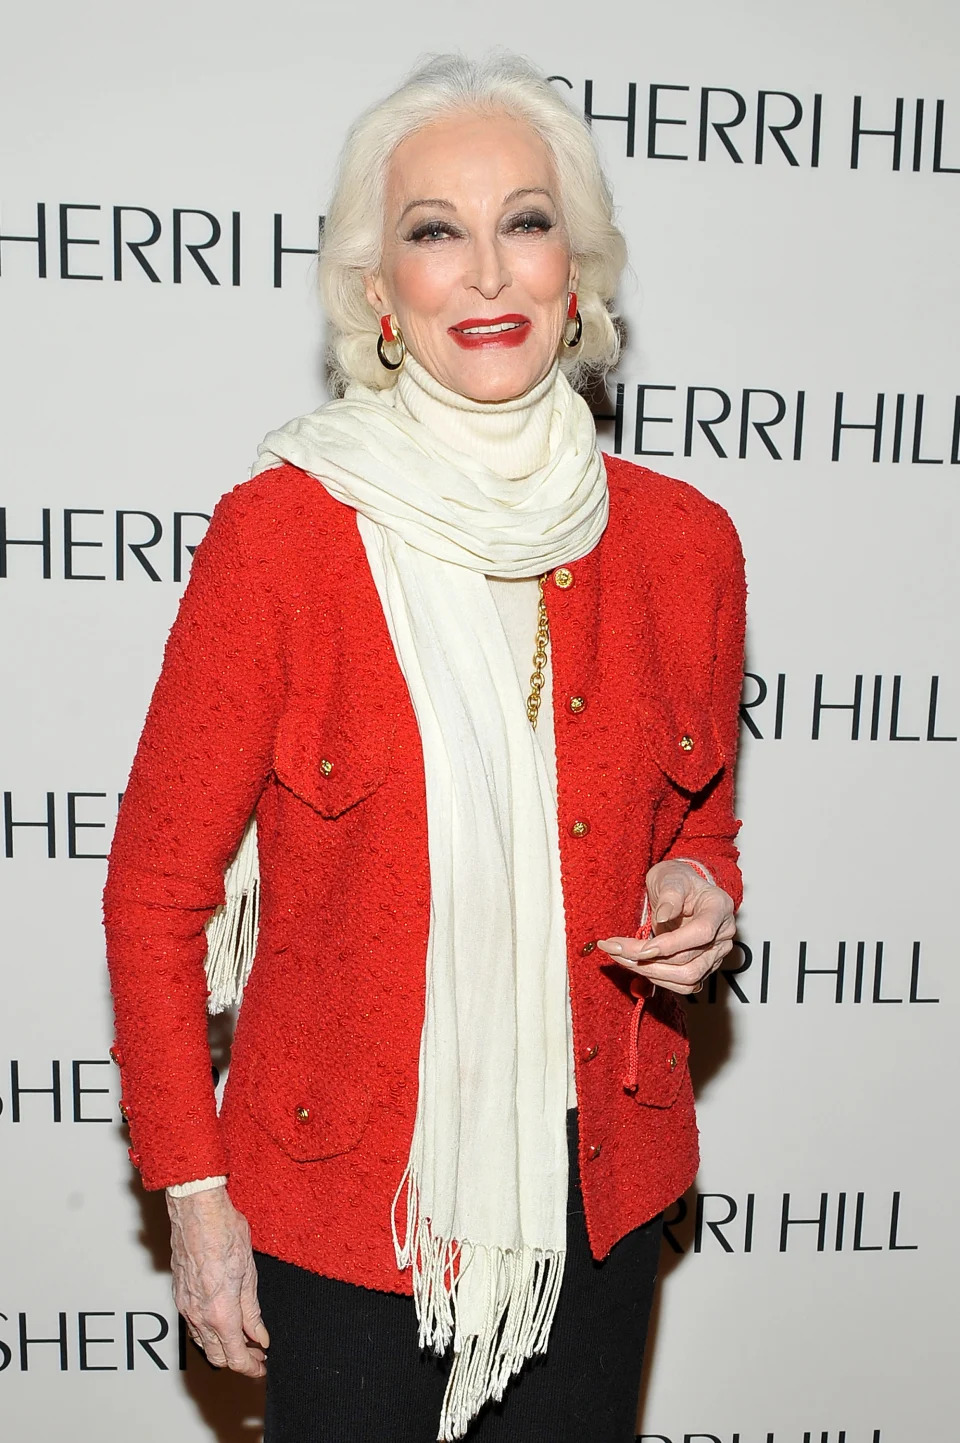 NEW YORK, NY - FEBRUARY 12:  Model Carmen Dell'Orefice attends the Sherri Hill Fall 2016 fashion show during New York Fashion Week: The Shows on February 12, 2016 in New York City.  (Photo by D Dipasupil/Getty Images for NYFW: The Shows)